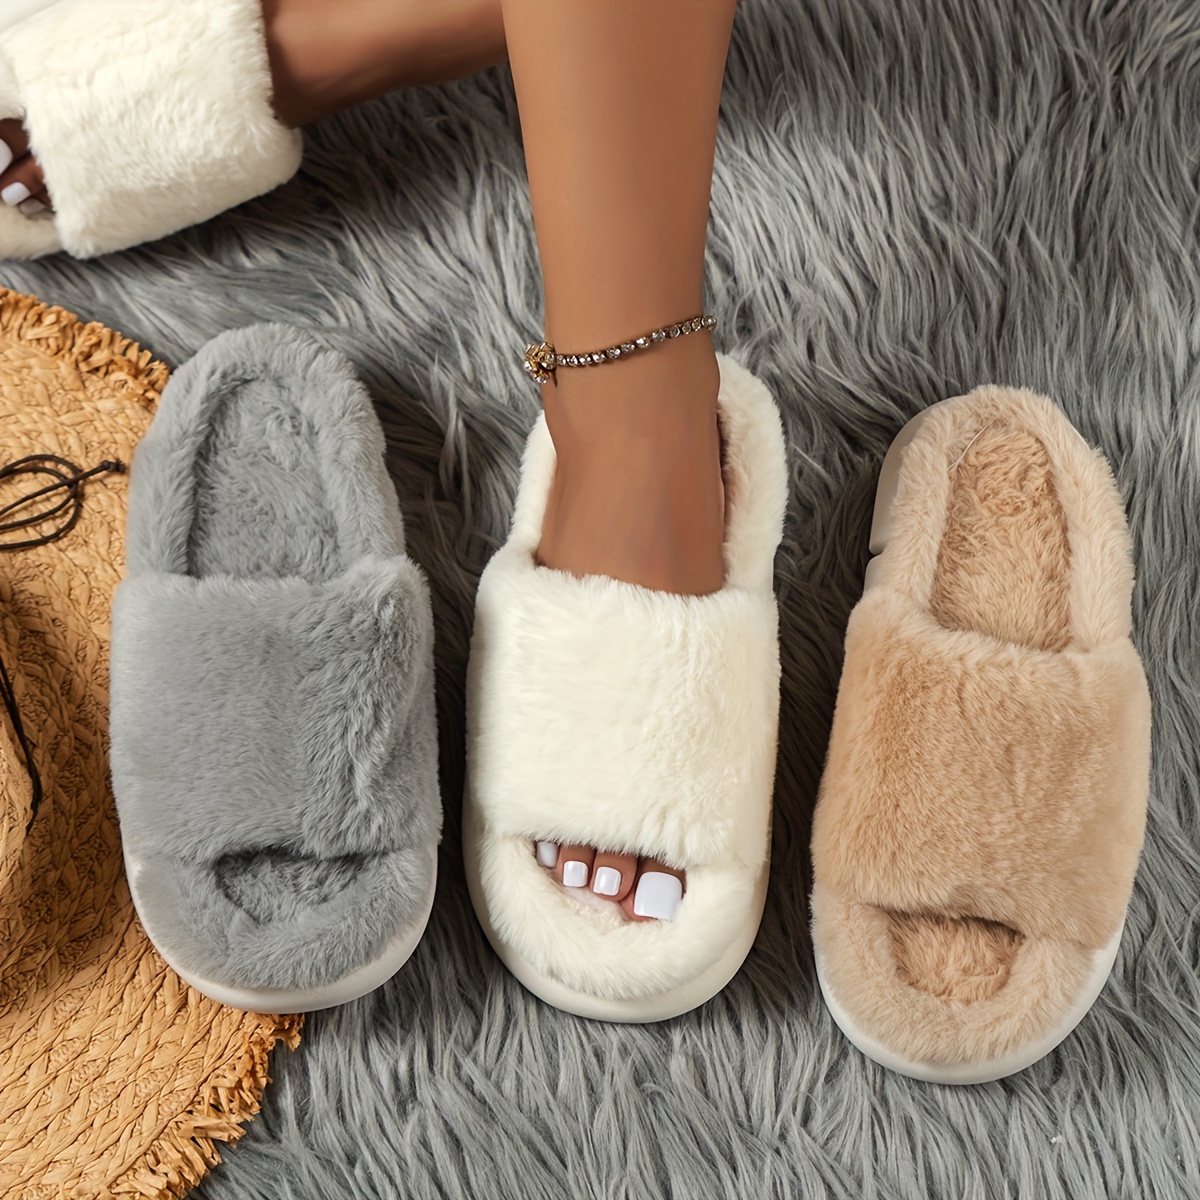 

Cozy Fluffy Furry House Slippers, Single Band Open Toe Platform Fuzzy Shoes, Comfy Warm Home Slippers